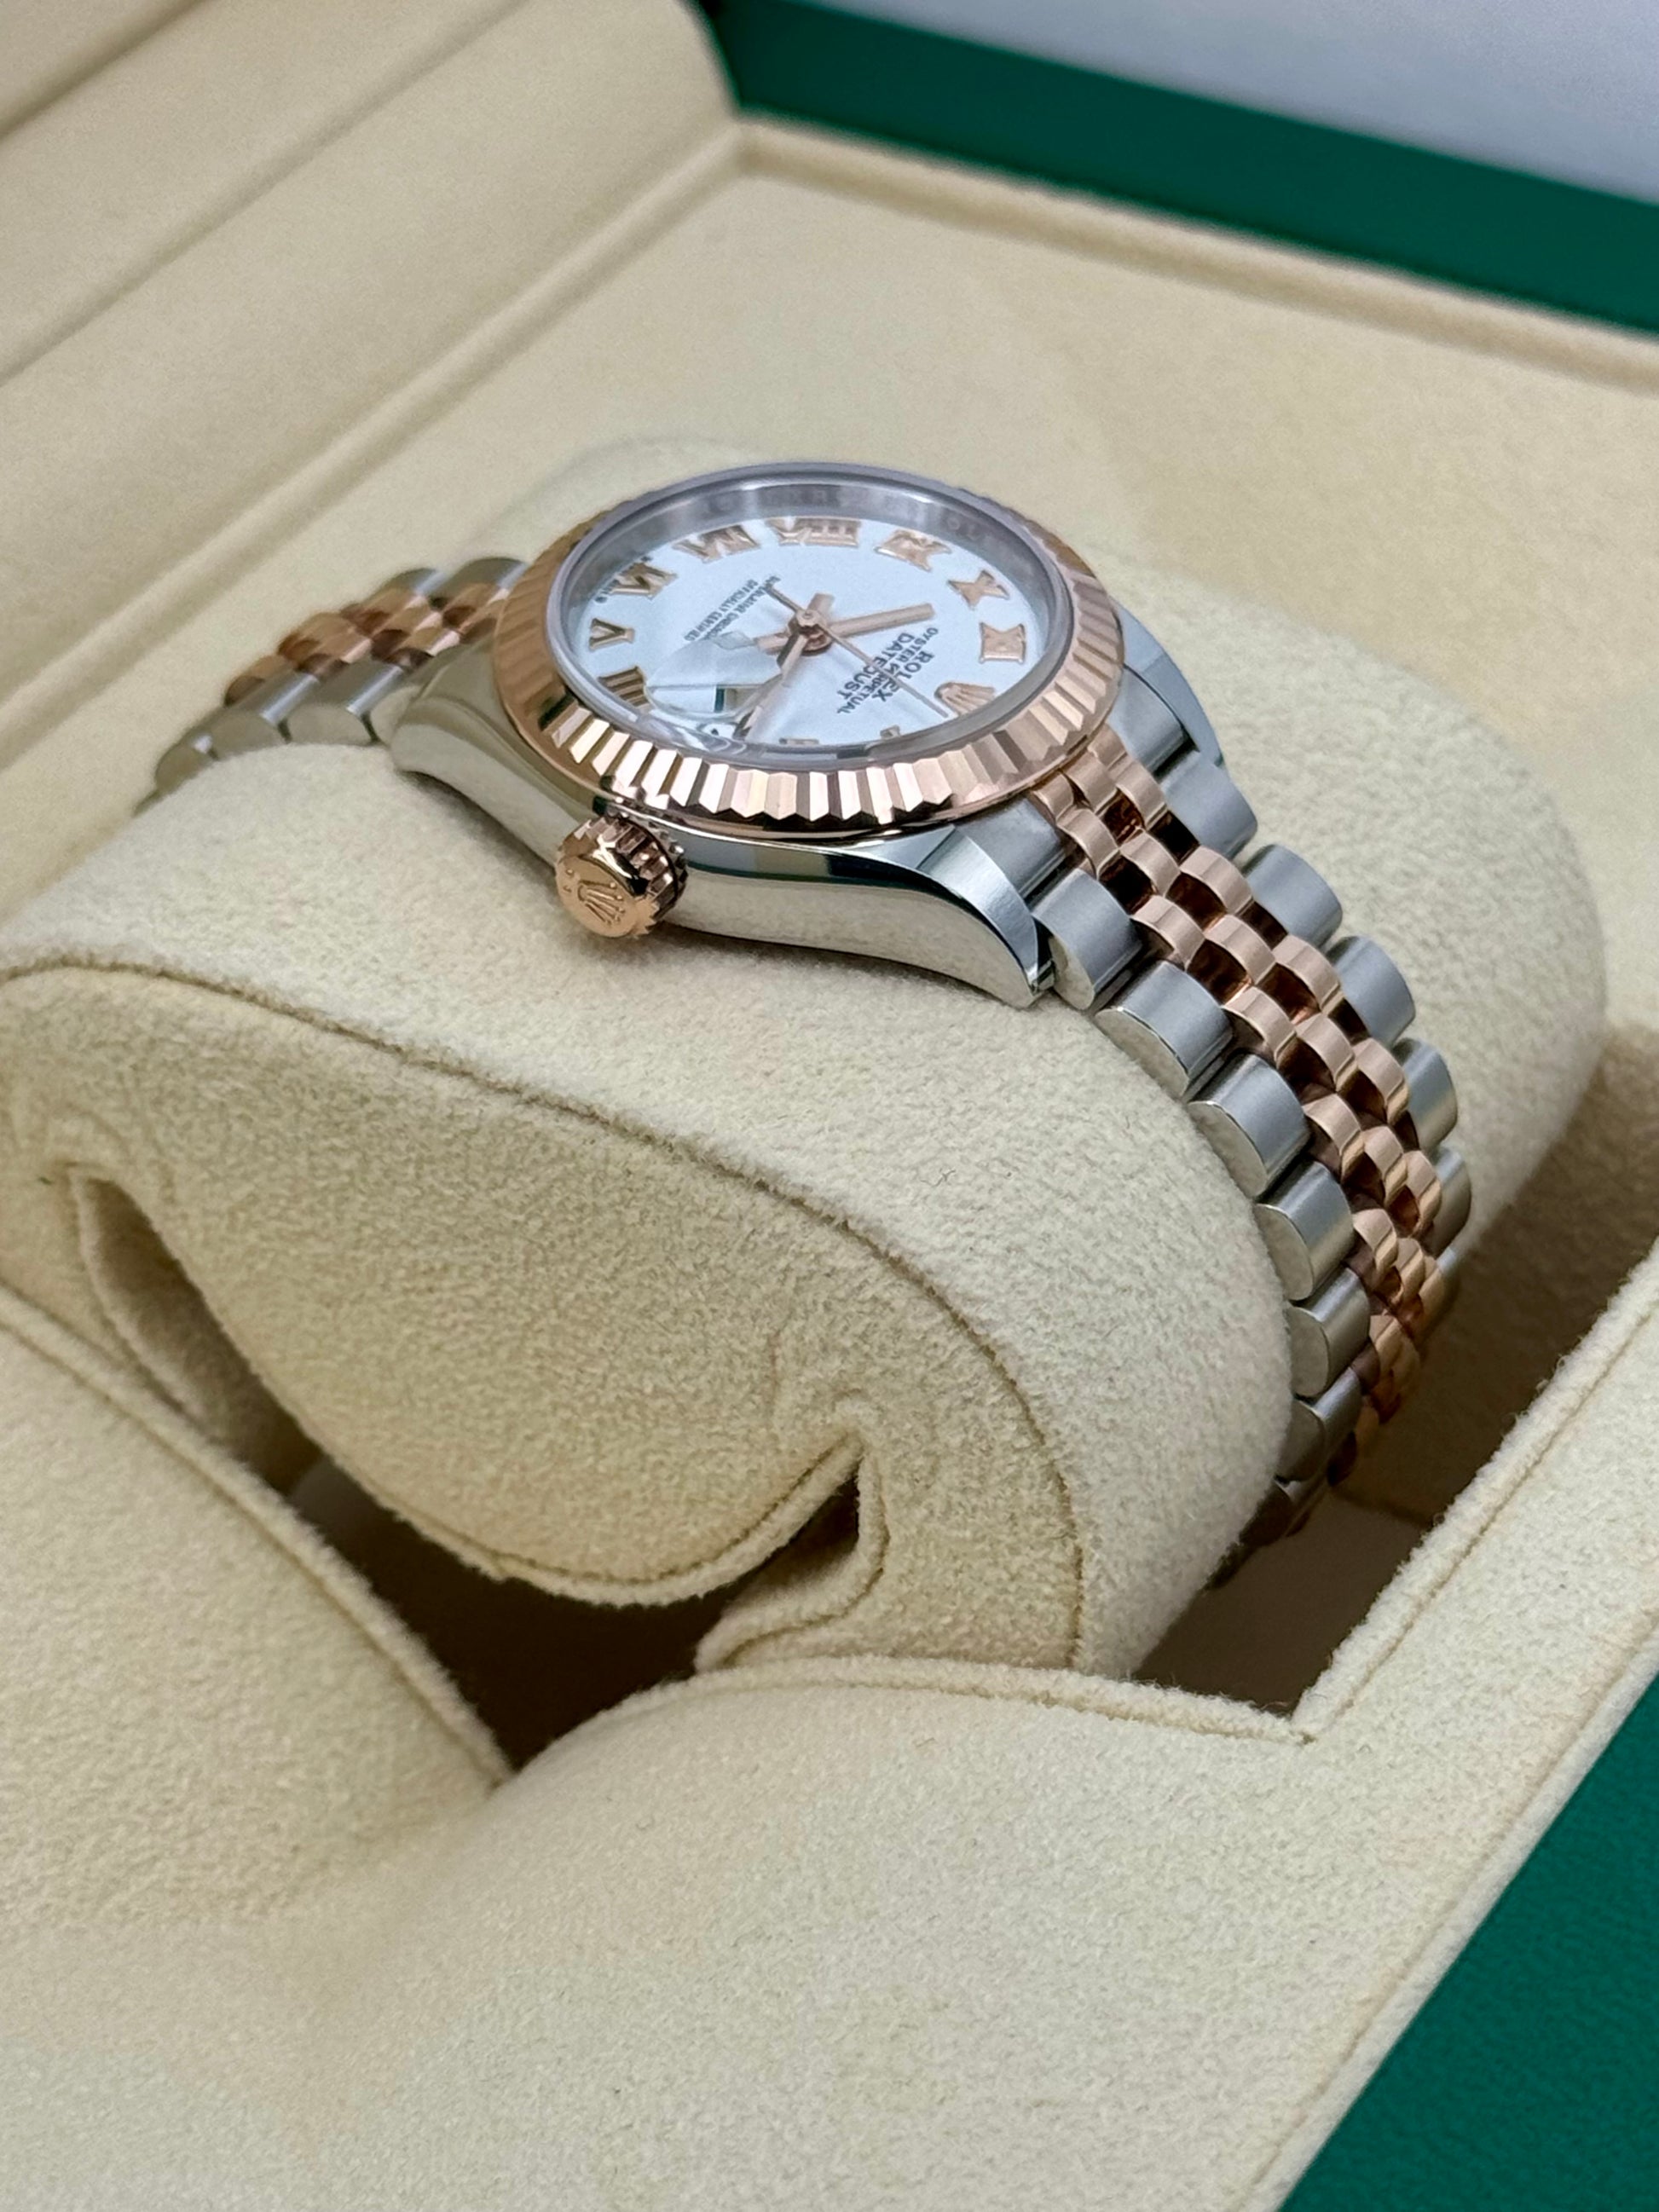 NEW 2022 Rolex Lady-Datejust 28mm 279171 Two-Tone Jubilee White Dial - MyWatchLLC